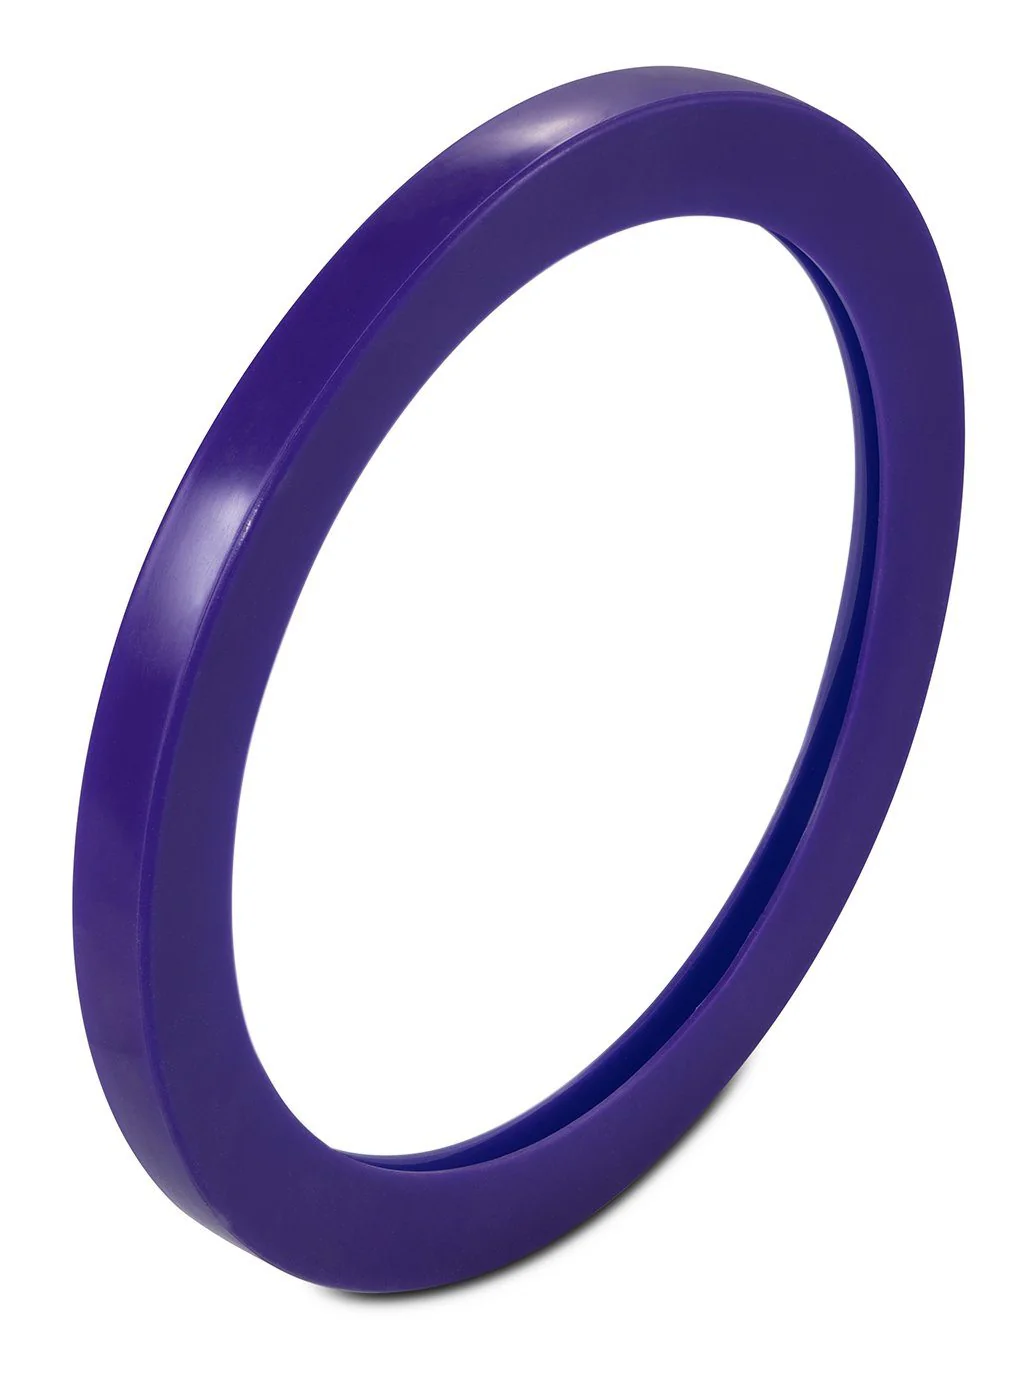 BVV 10.75" / 11.25" Chamber Gasket - Purple Questions & Answers